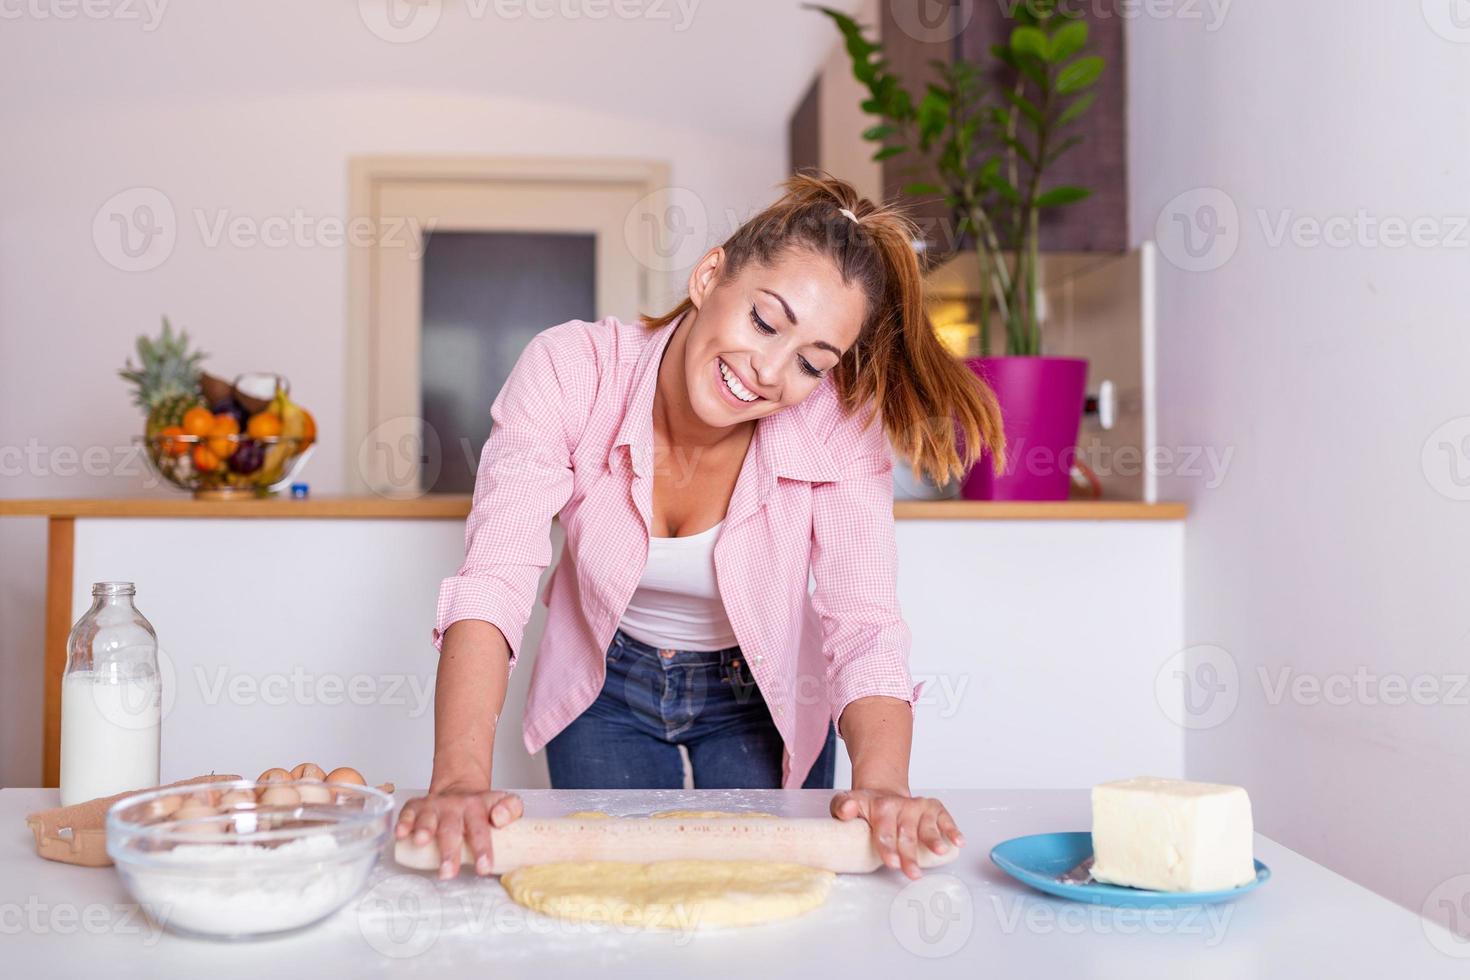 kitchen prepares flour doughHappy attractive young adult woman lady housewife baker holding pin rolling dough on kitchen table baking pastry concept cooking cake biscuit doing bakery at home photo